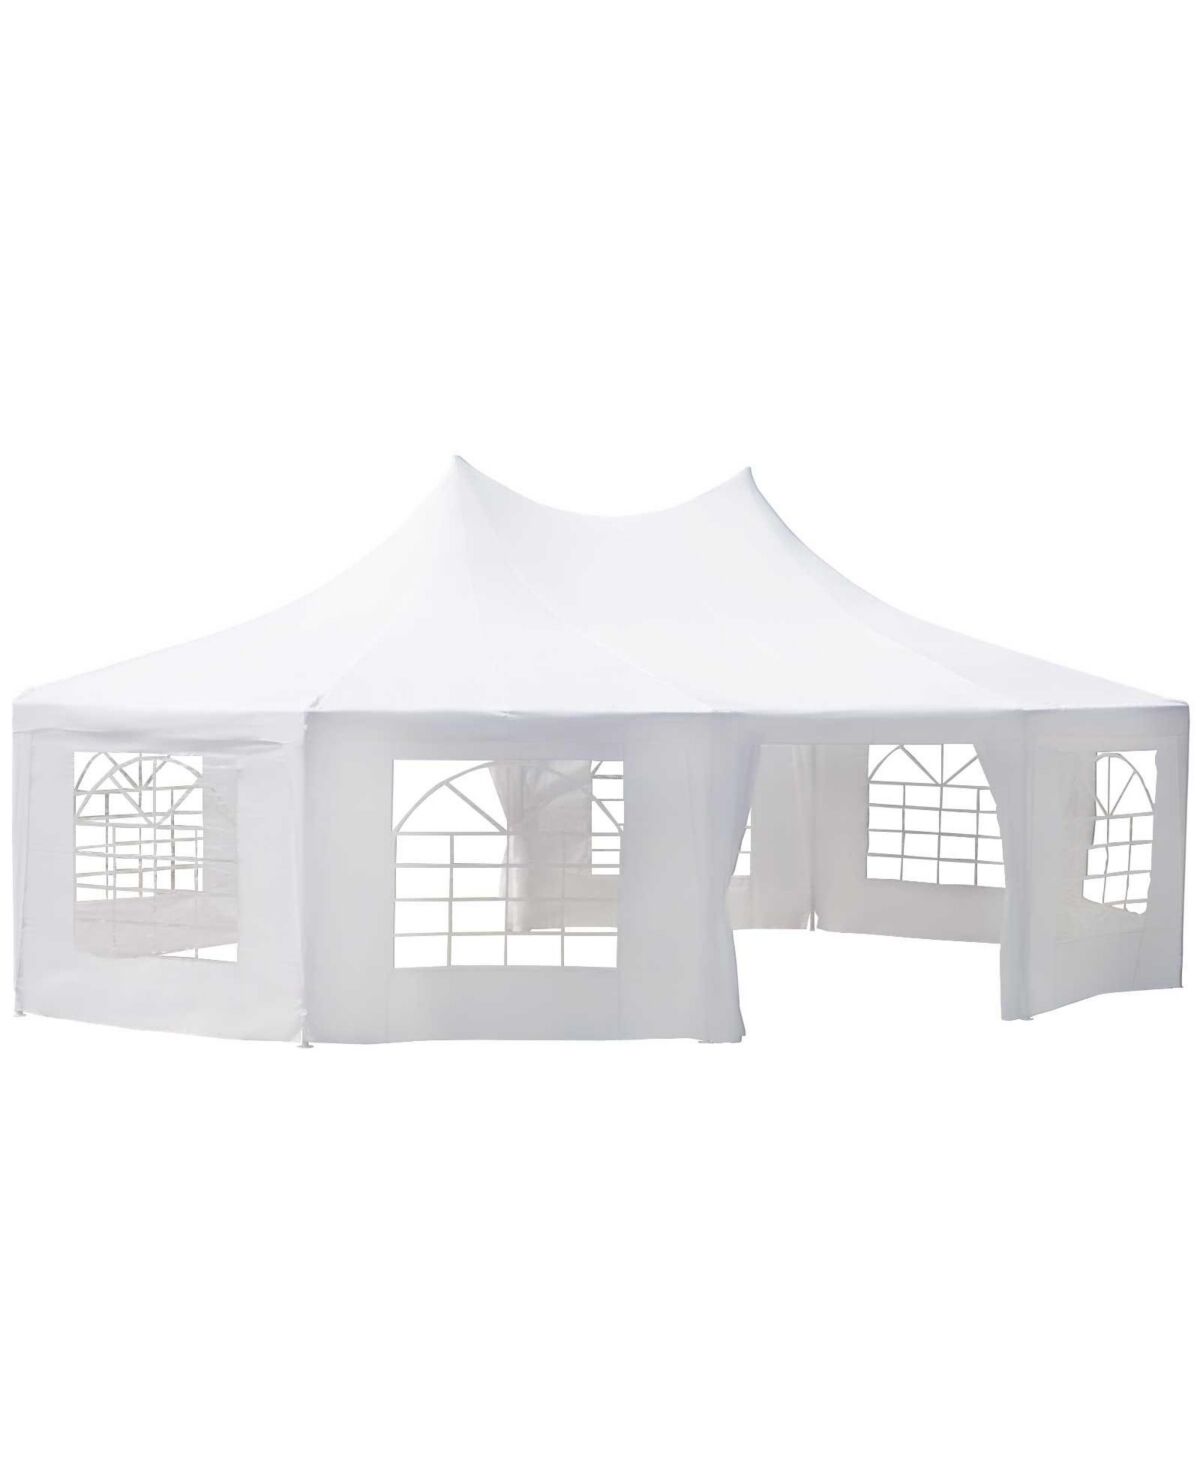 Outsunny 29.2'x21.3' Large 10-Wall Event Wedding Gazebo Canopy Tent with Open Floor Design & Weather Protection, White - White